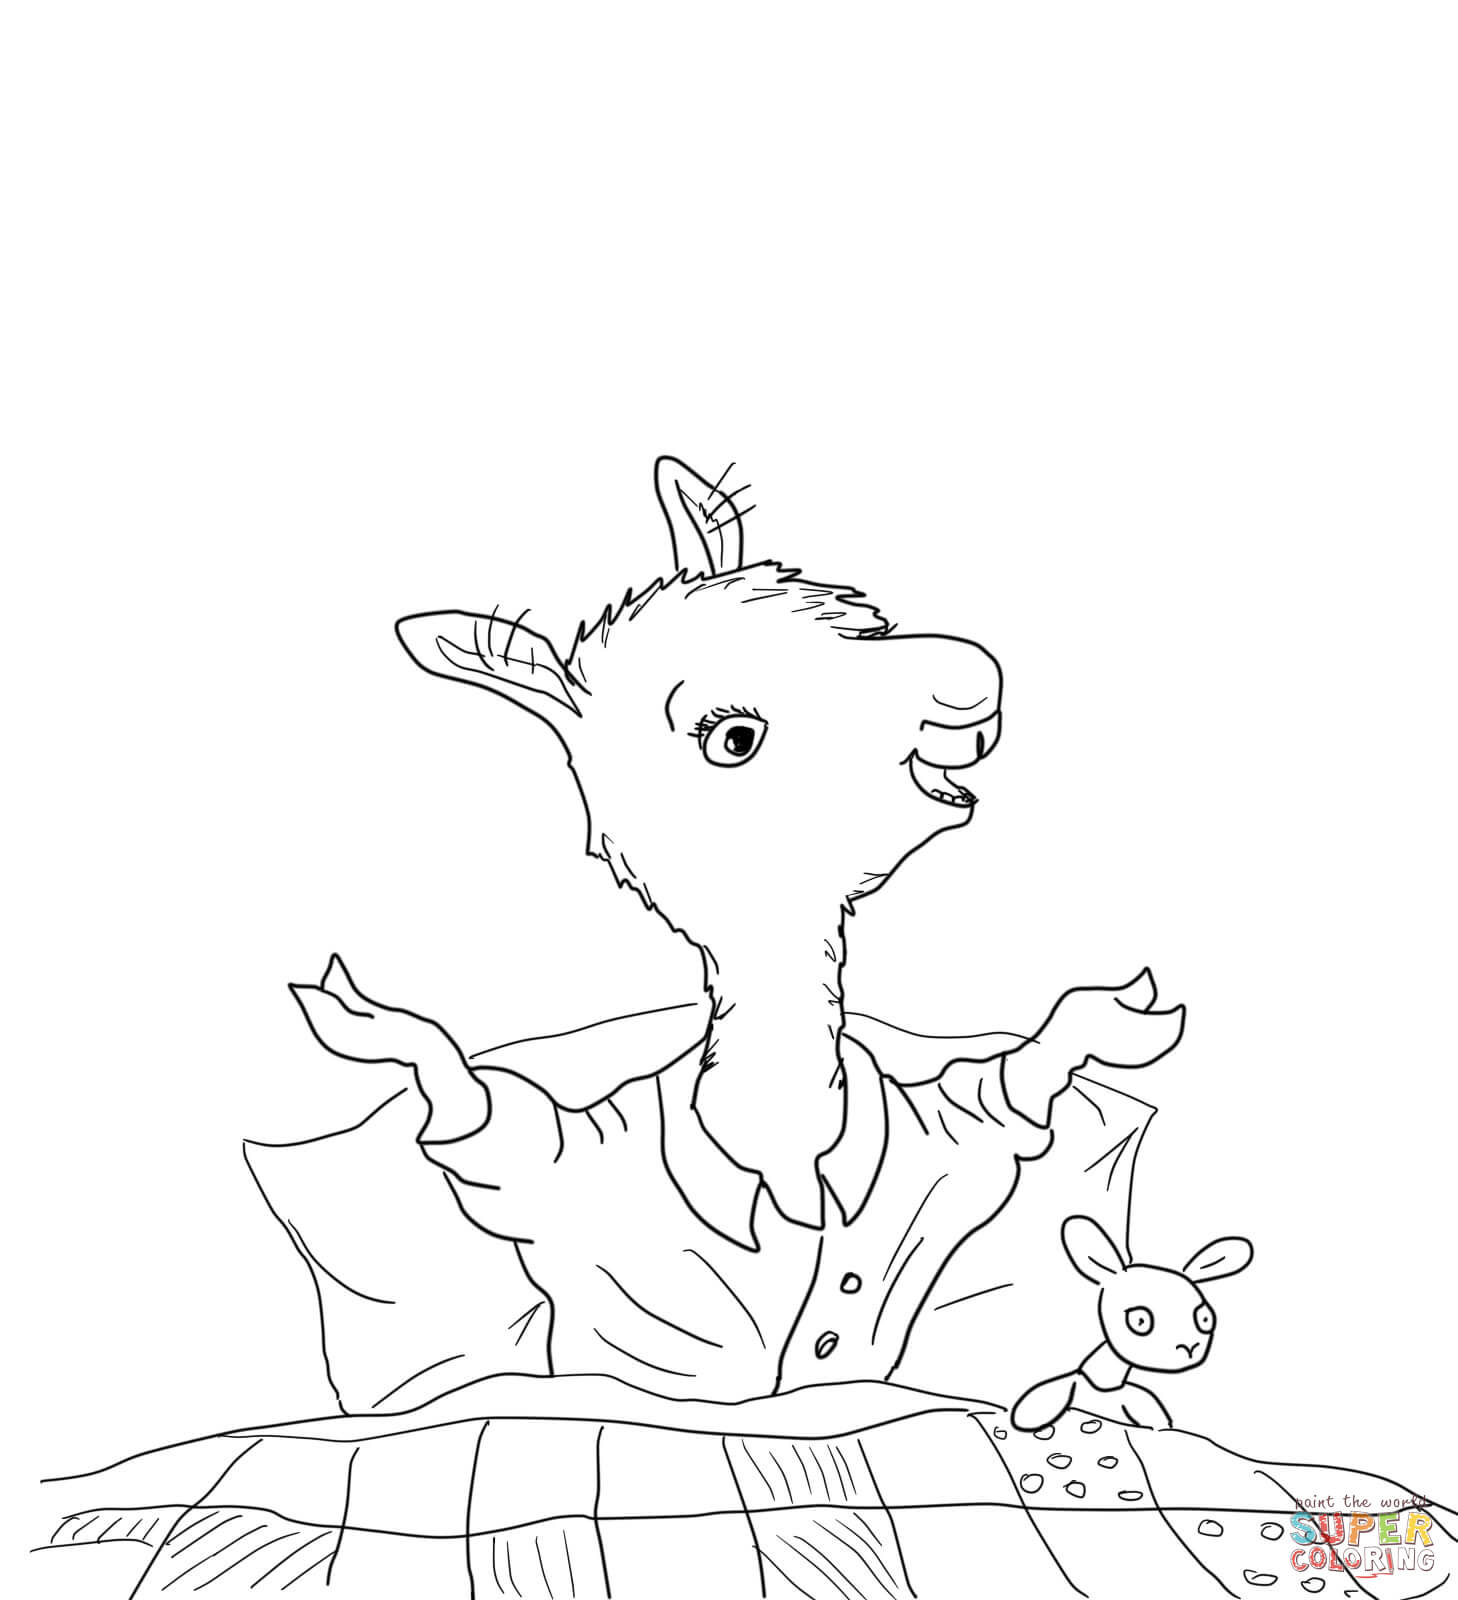 Llama Red Pajama Coloring Page - Get Coloring Pages